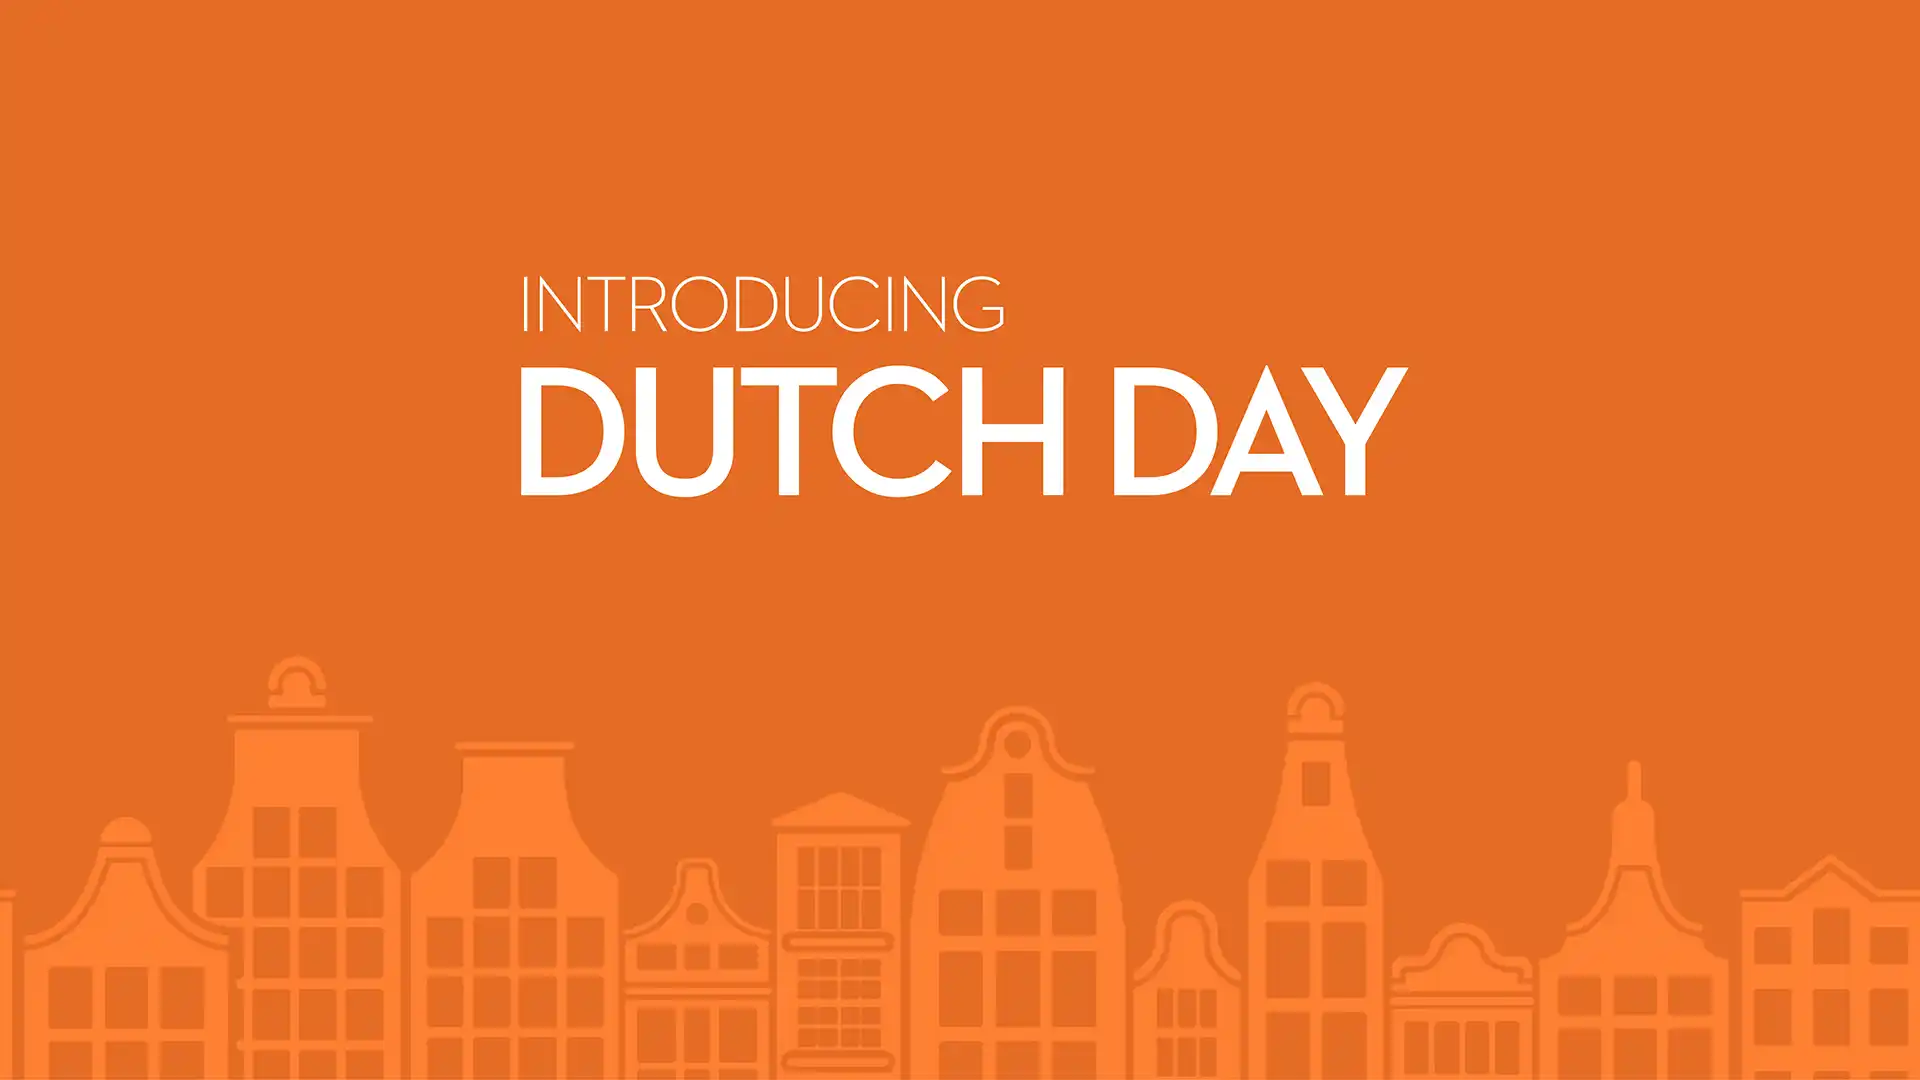 Orange image with white text that says Introducing Dutch Day.